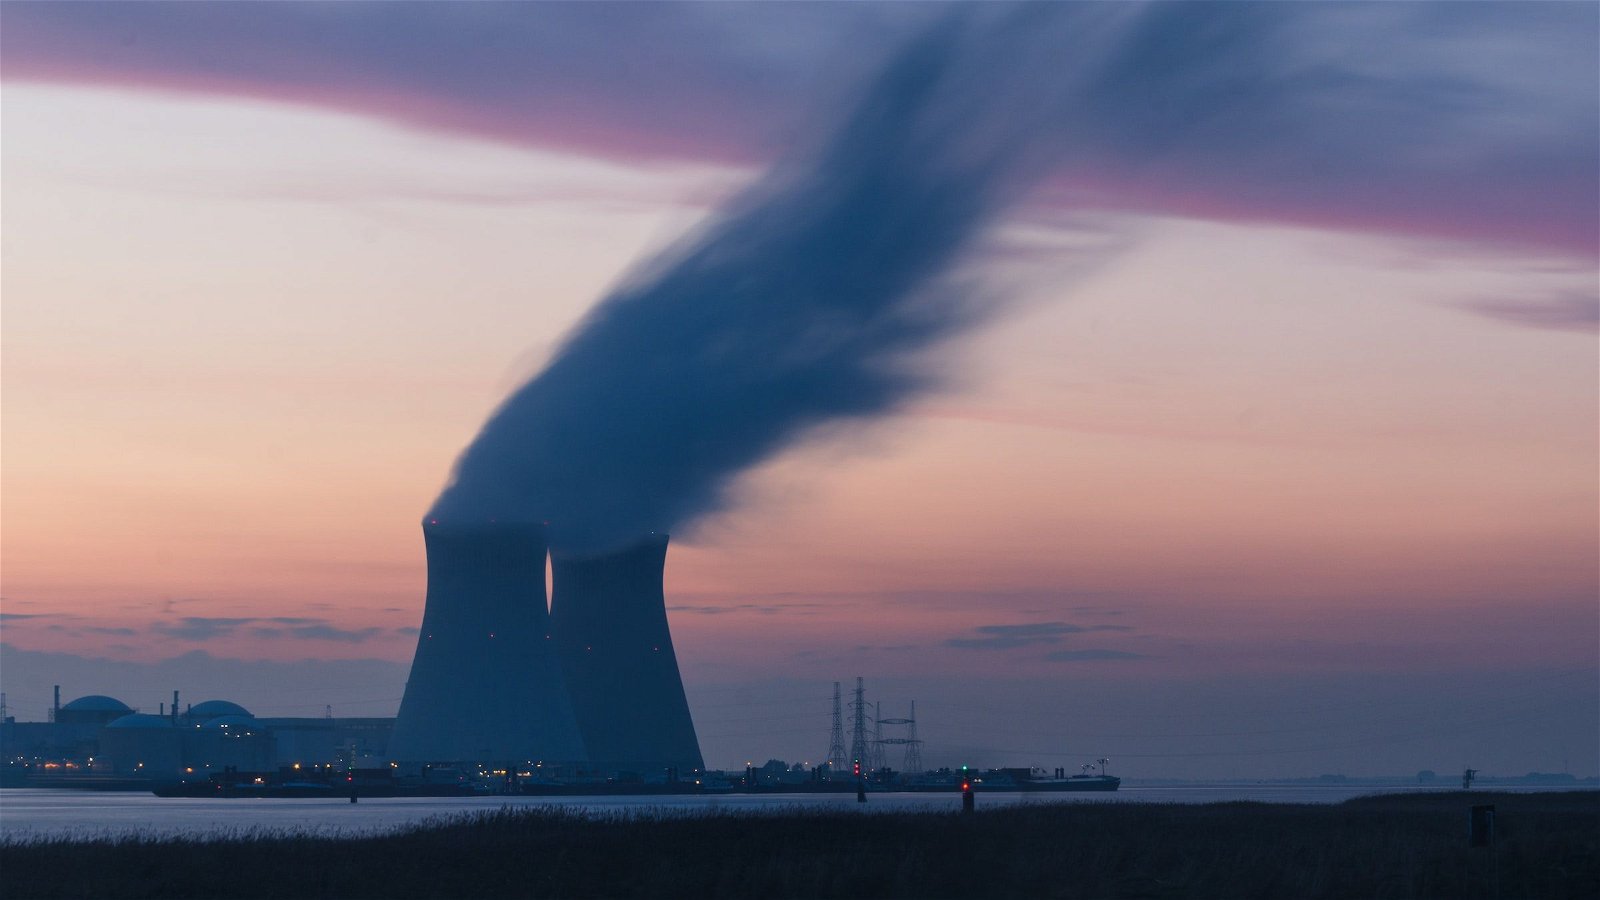 Nuclear economics - Lessons from Lazard to Hinkley Point-C